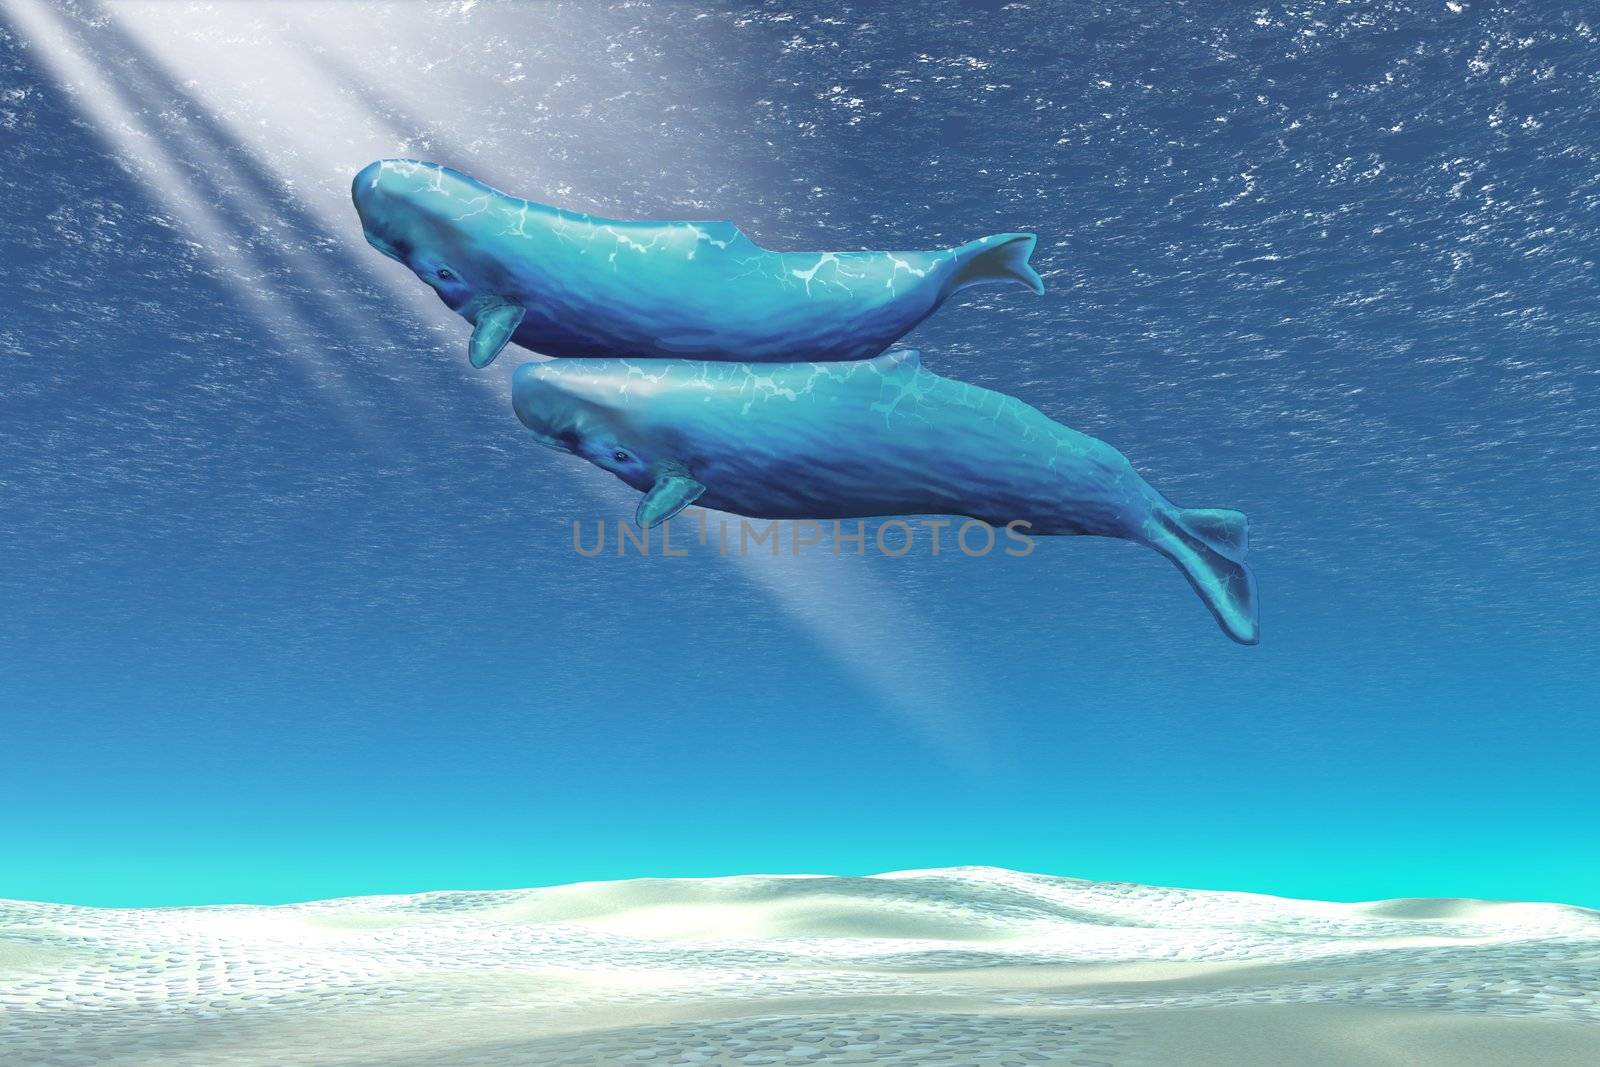 Two sperm whales near the surface of the ocean.